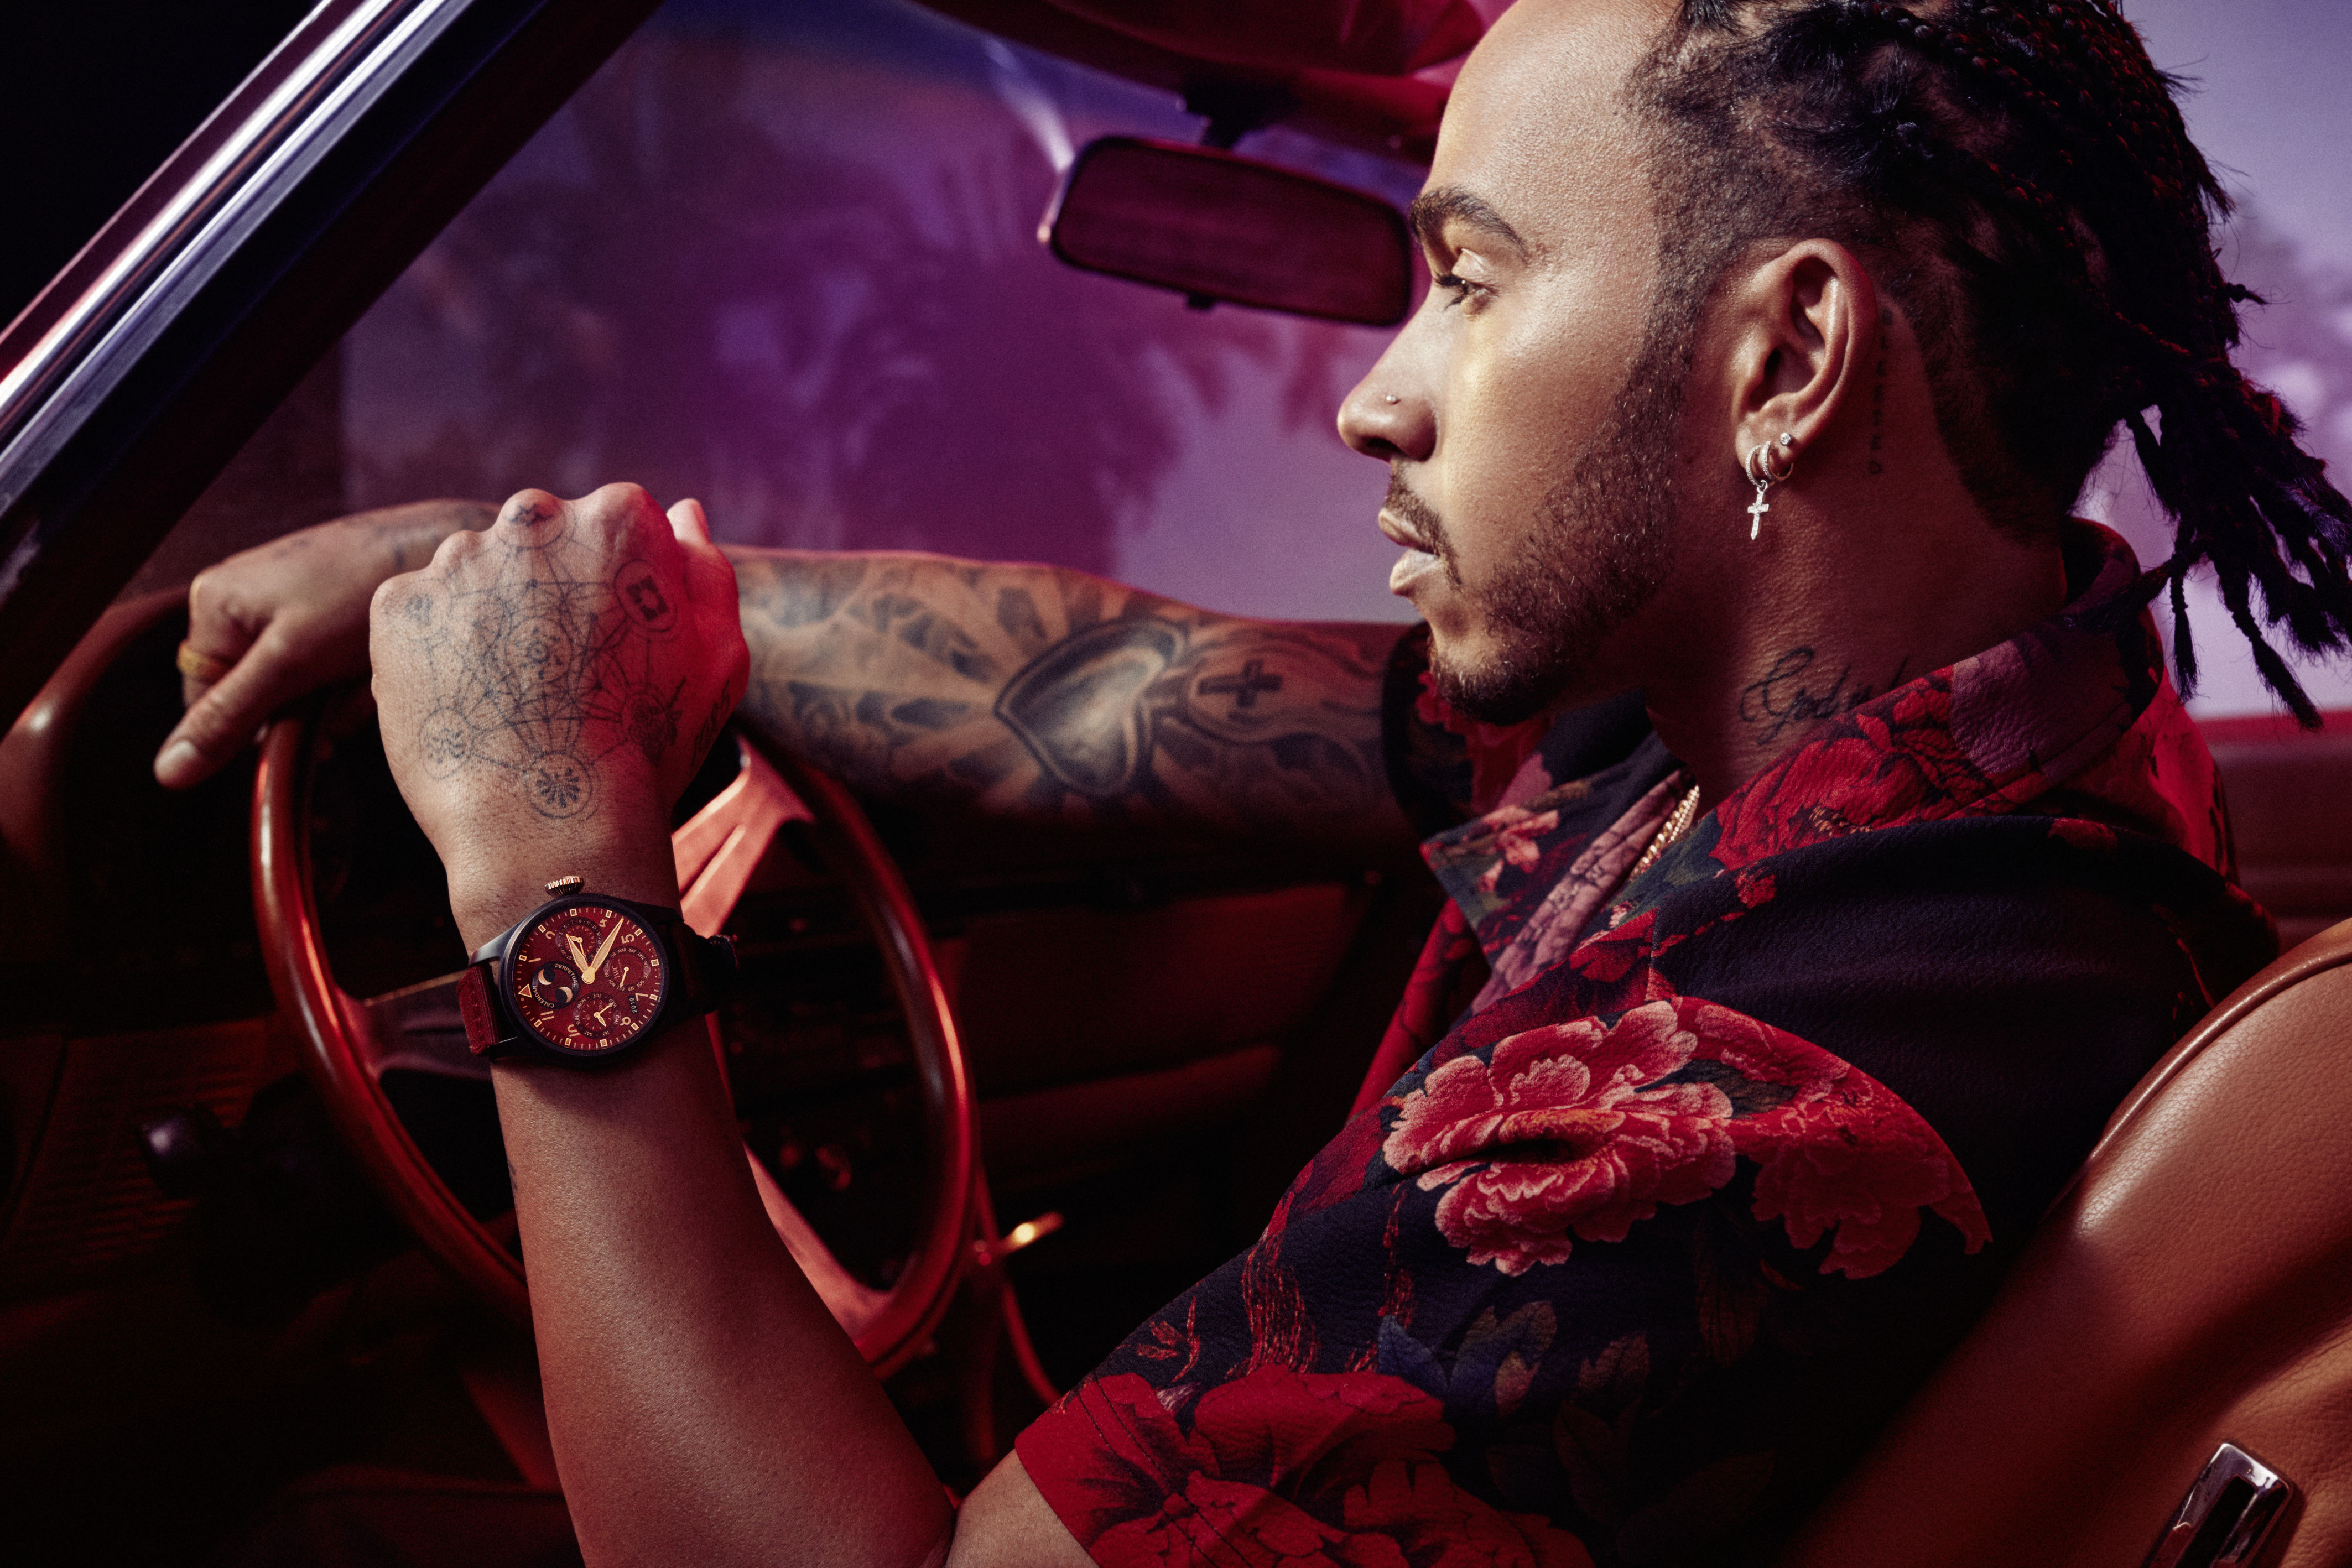 Inside Lewis Hamilton's luxury watch collection: the F1 icon